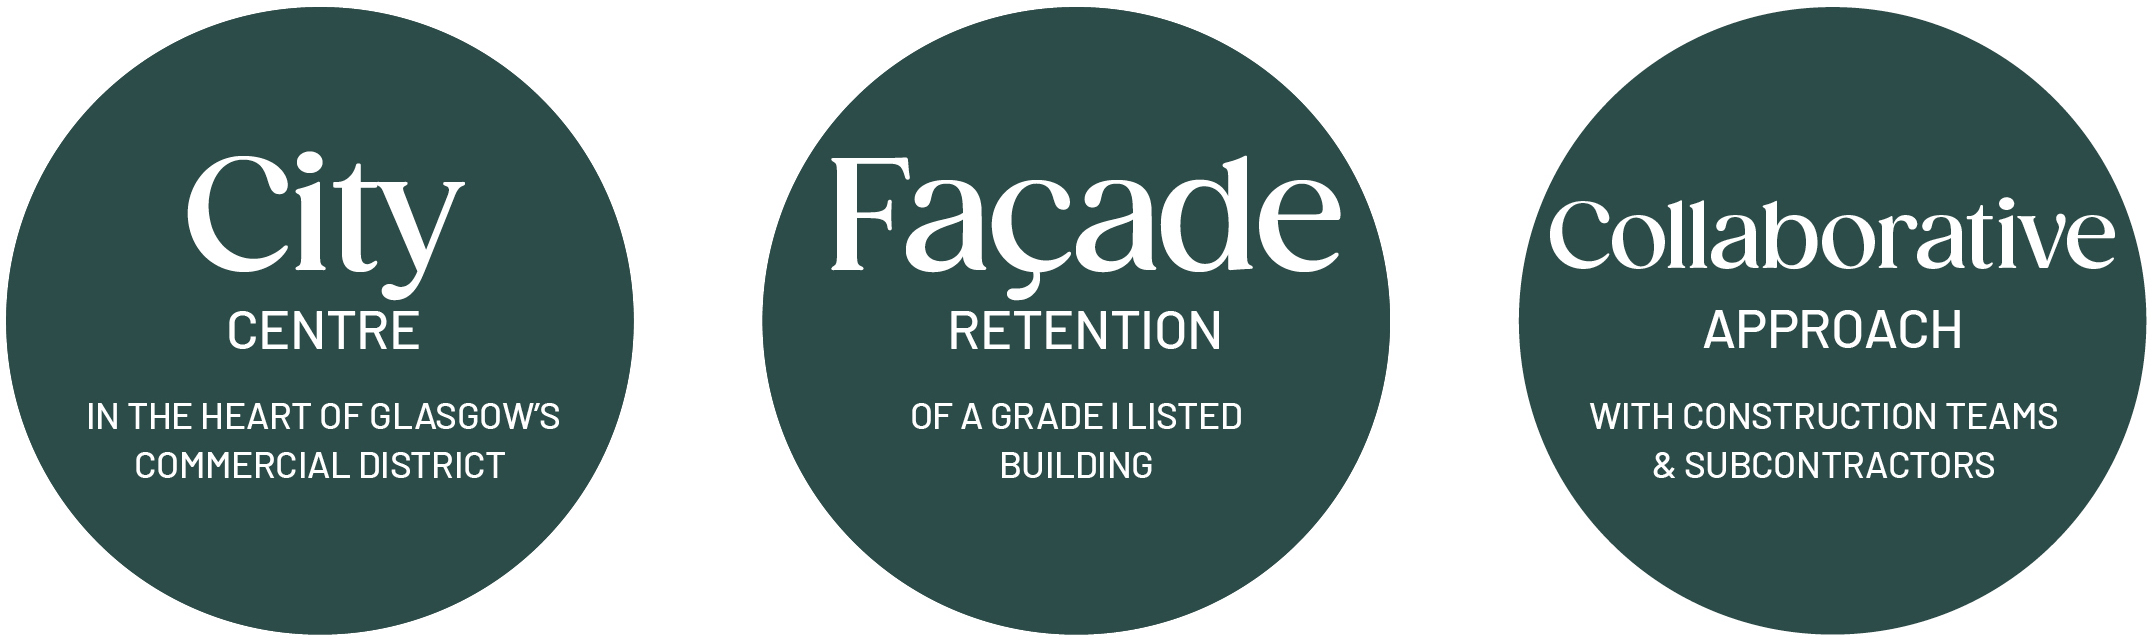 three project highlights of city centre façade retention project in Glasgow. City centre - in the heart of glasgow's commercial district. Façade retention of a Grade A listed building. Collaborative approach with construction teams and subcontractors.